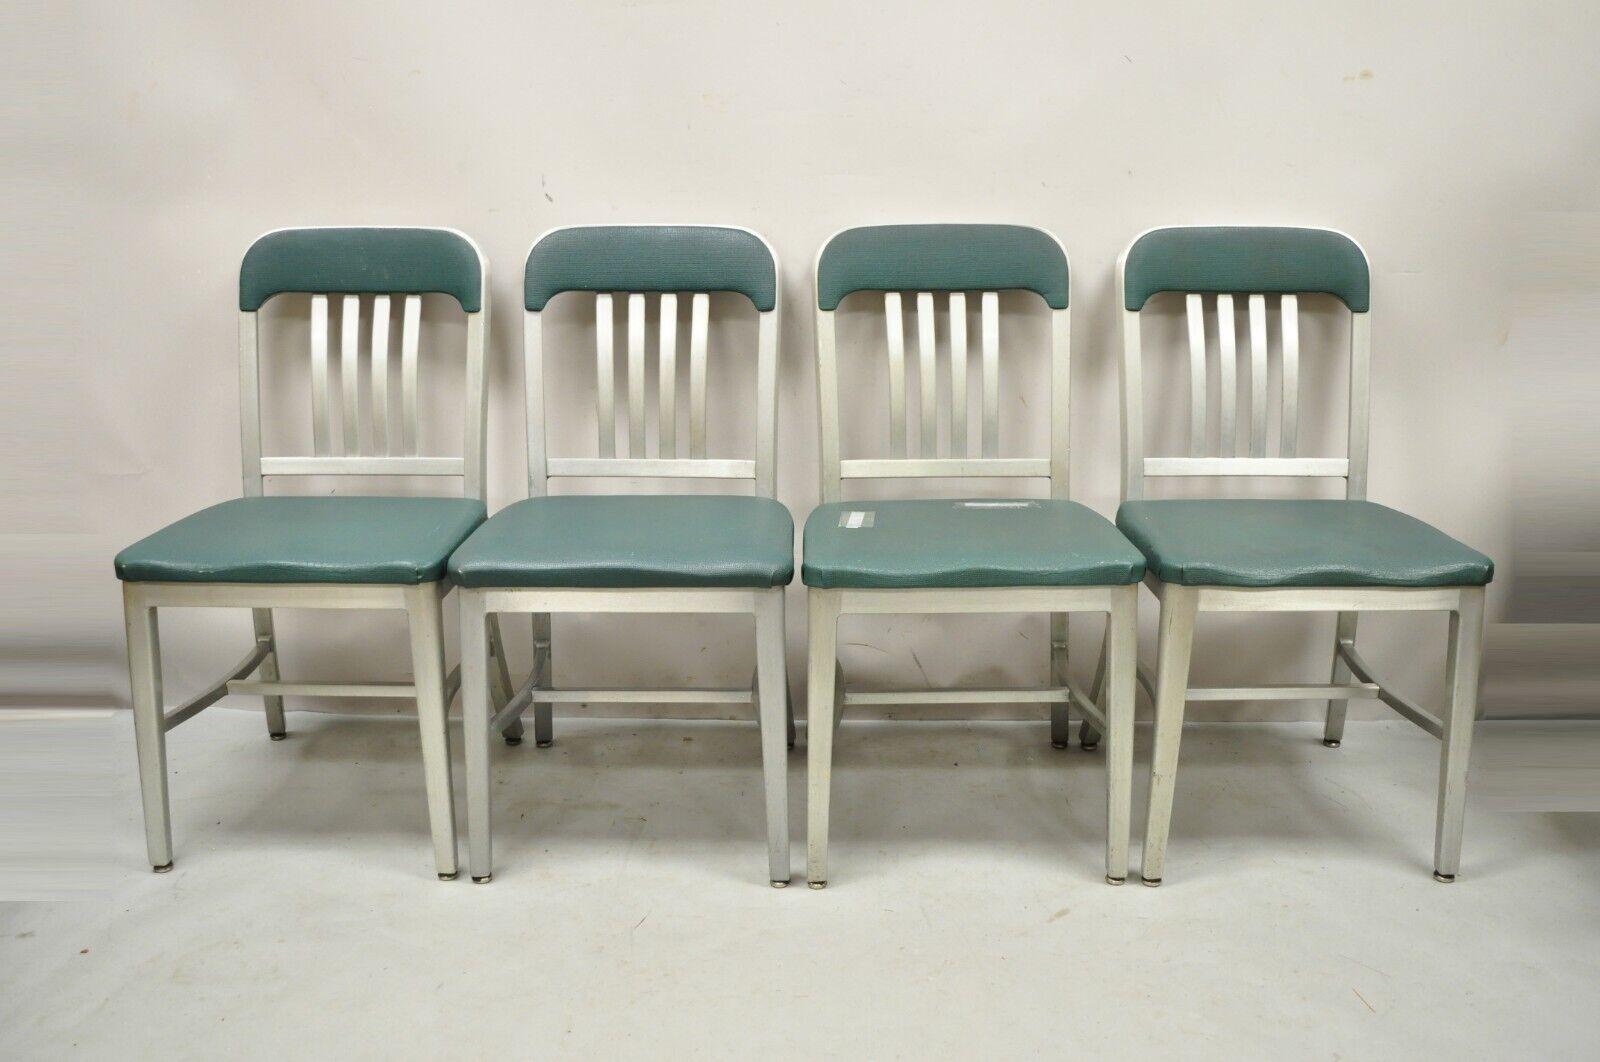 Vintage Good Form Aluminum Frame Green Vinyl side chairs - Set of 4. Item features green vinyl back and seat, original label, aluminum frames, great vintage set. Circa Early to Mid 20th Century. Measurements: 34